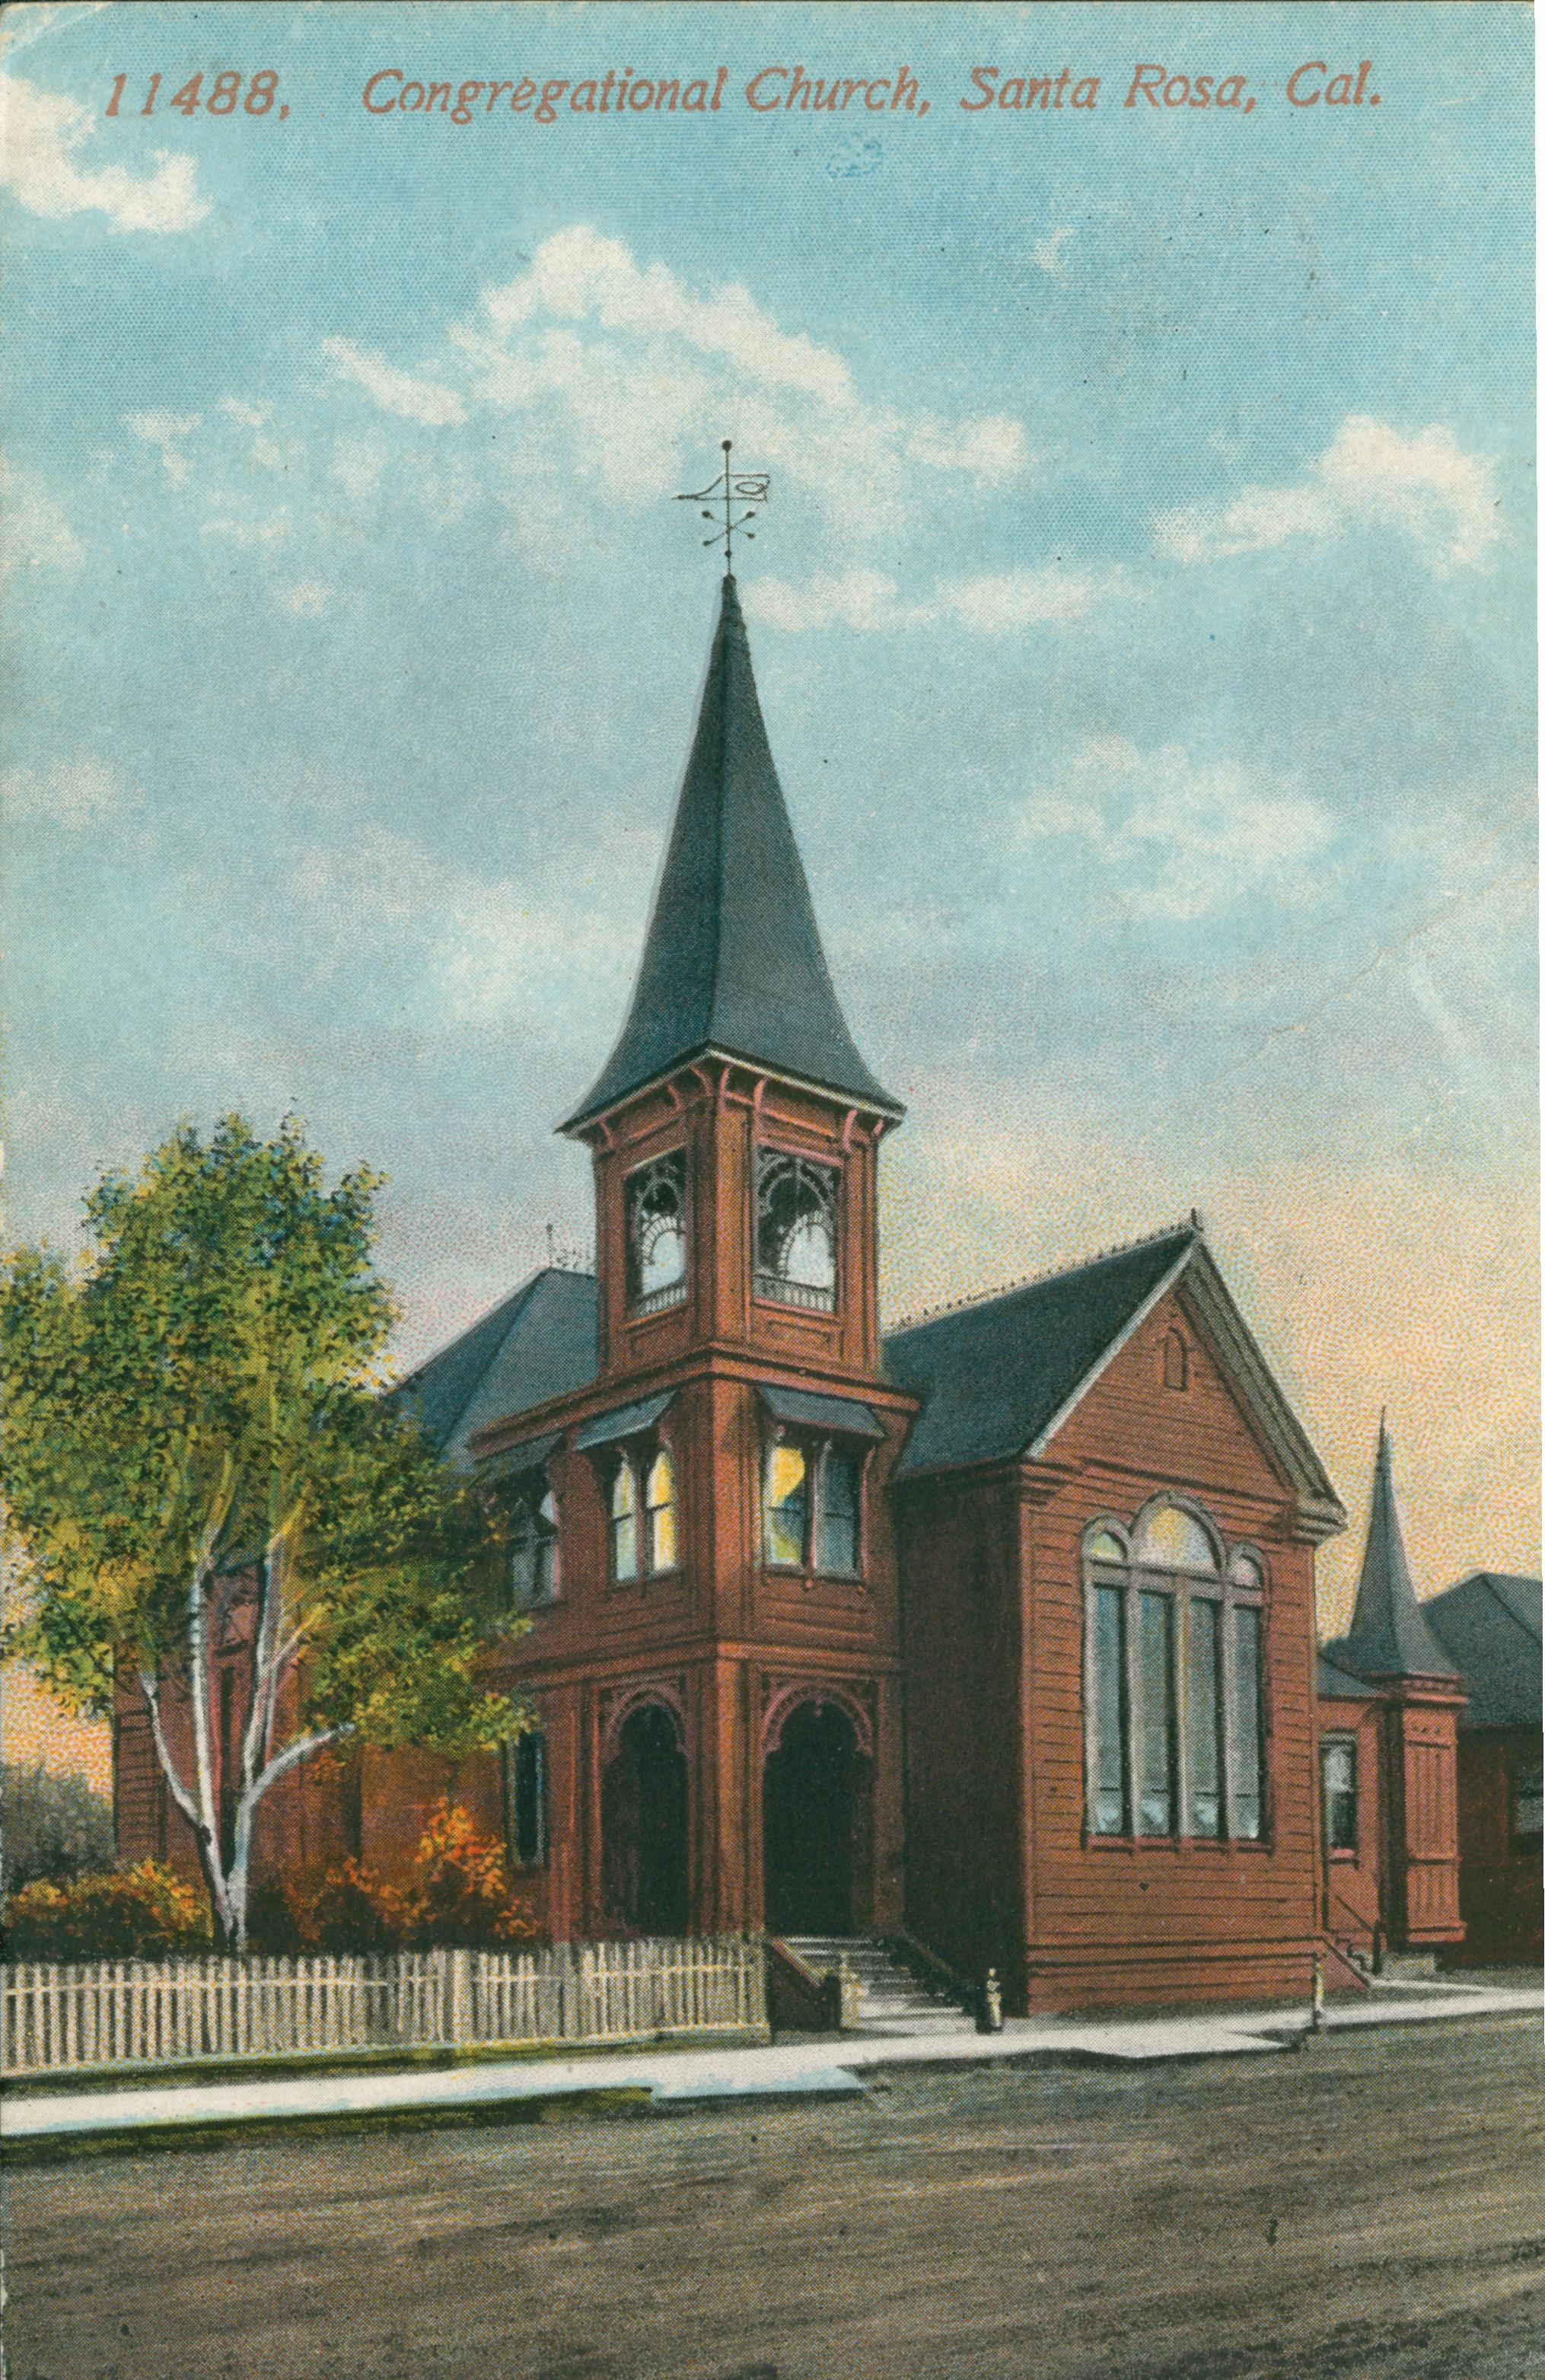 Shows the front of the Congregational Church in Santa Rosa